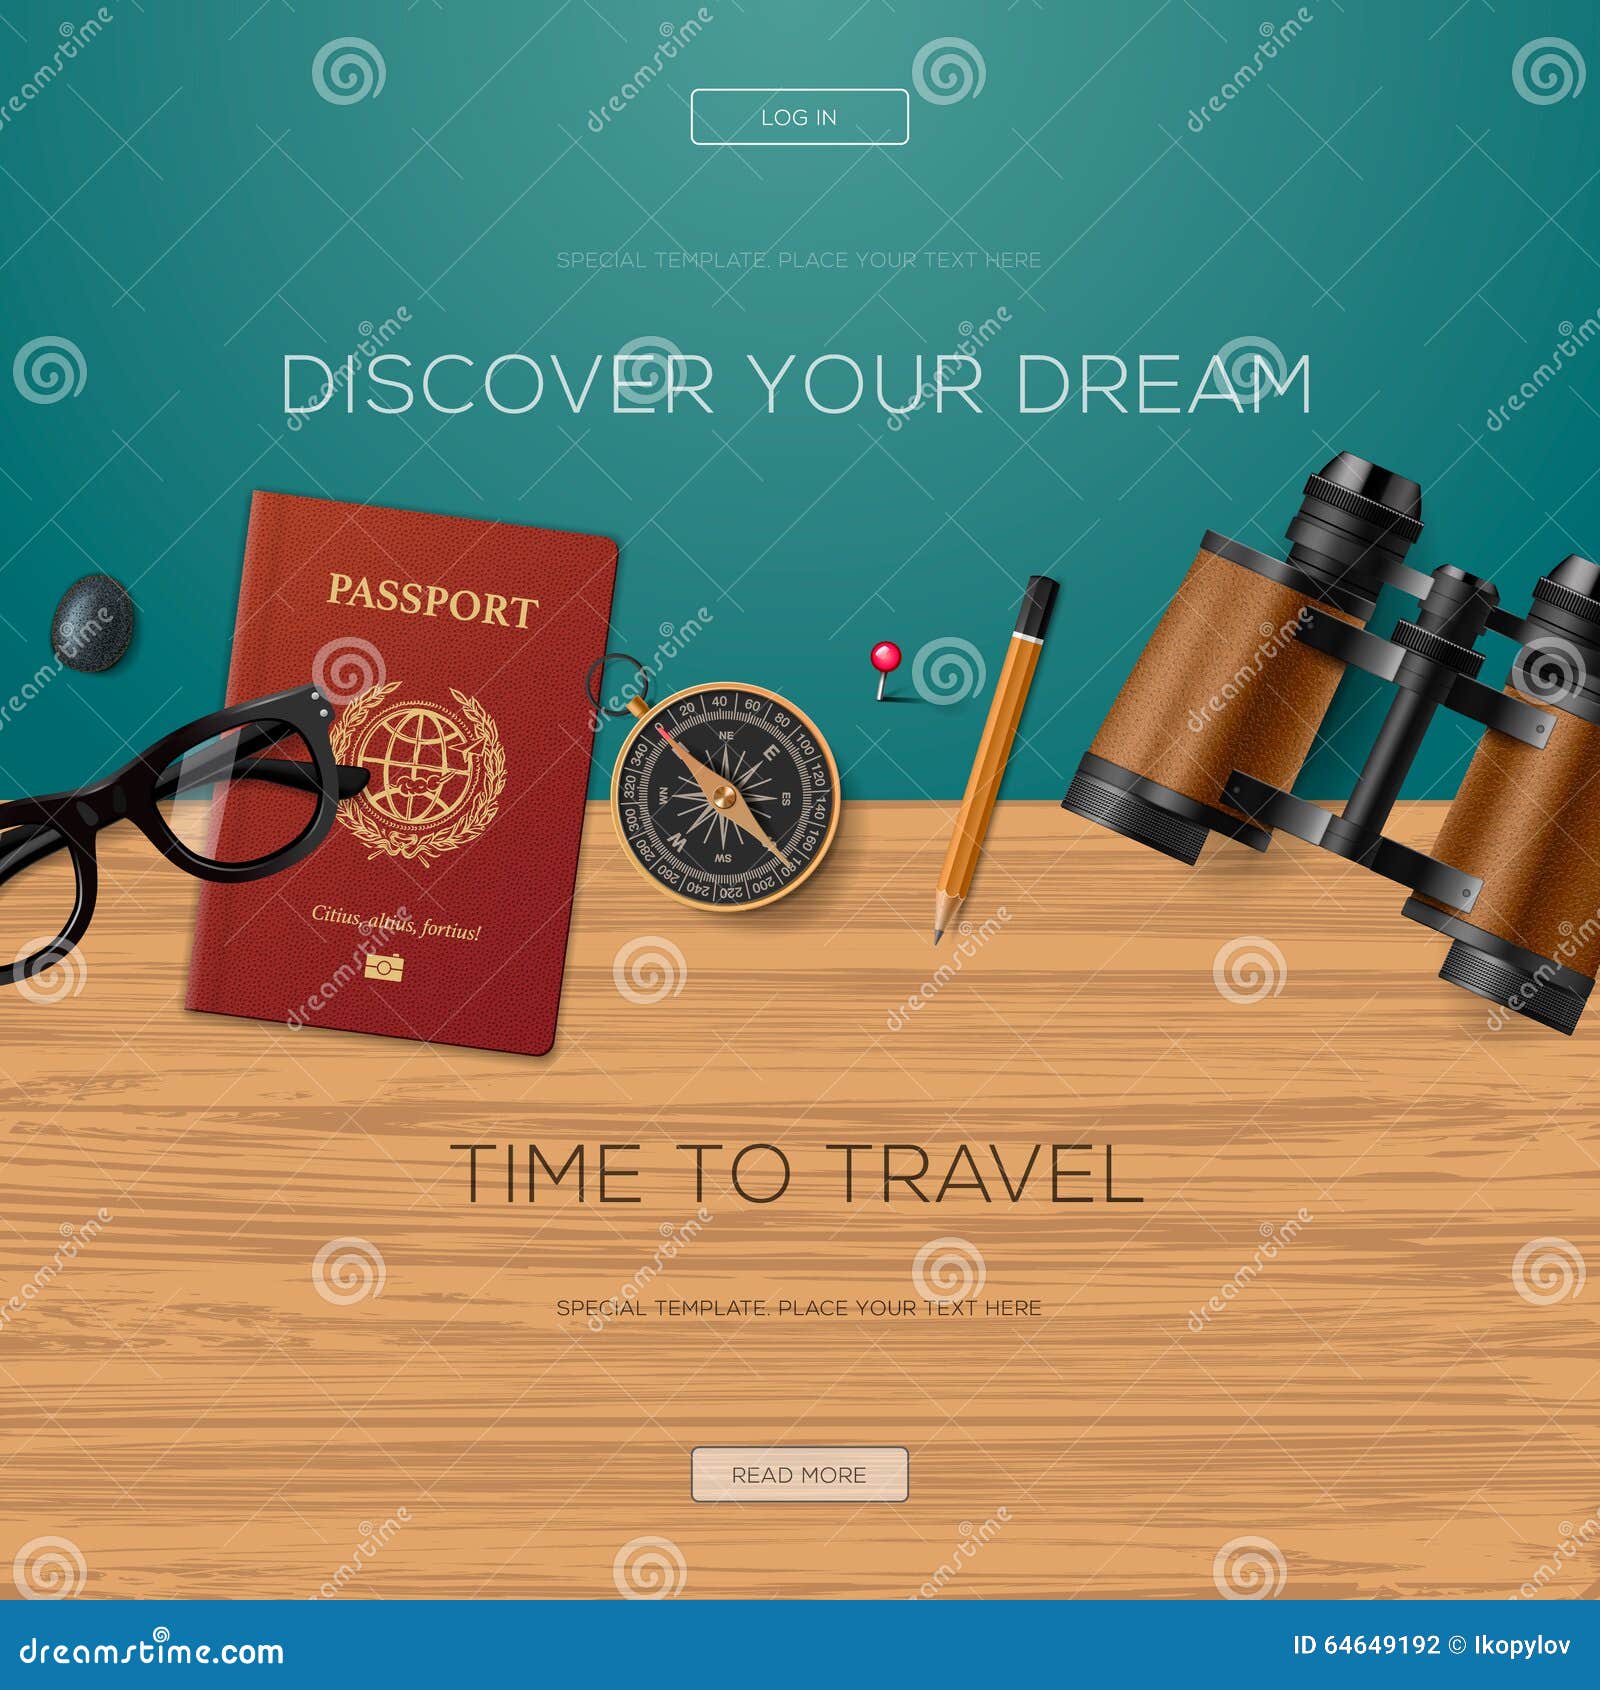 travel and adventure template, discover your dream